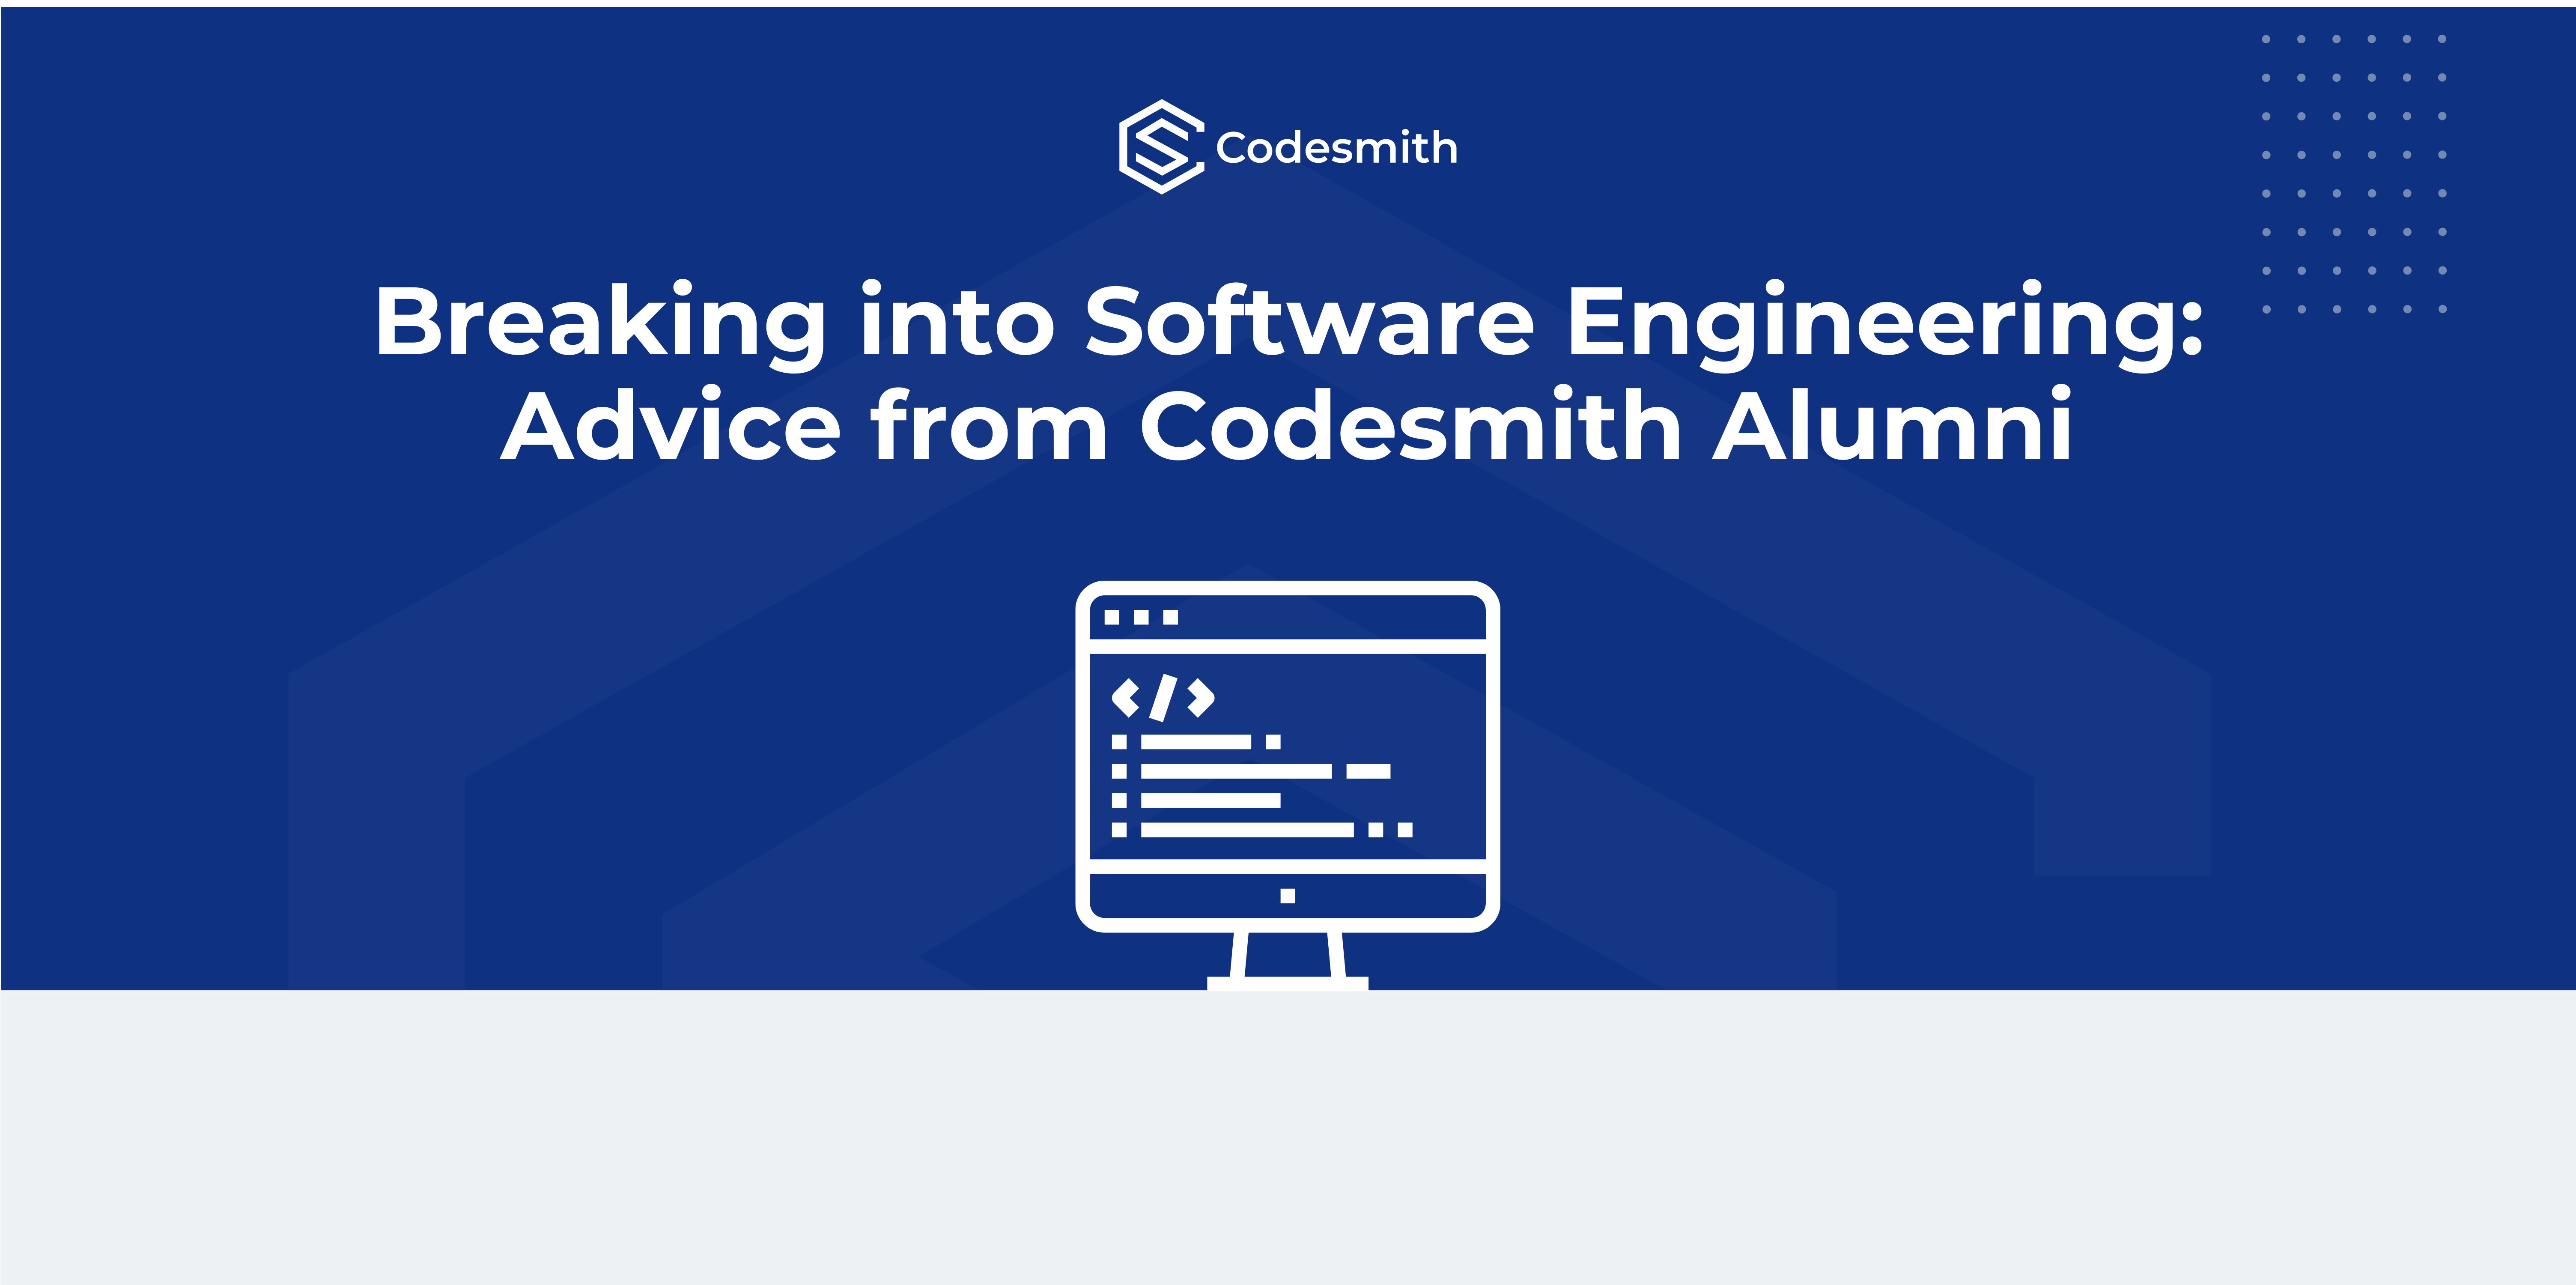 Image with blue background and graphic of a laptop with code on it. There is text on the image that reads Breaking into Software Engineering: Advice from Codesmith Alumni.